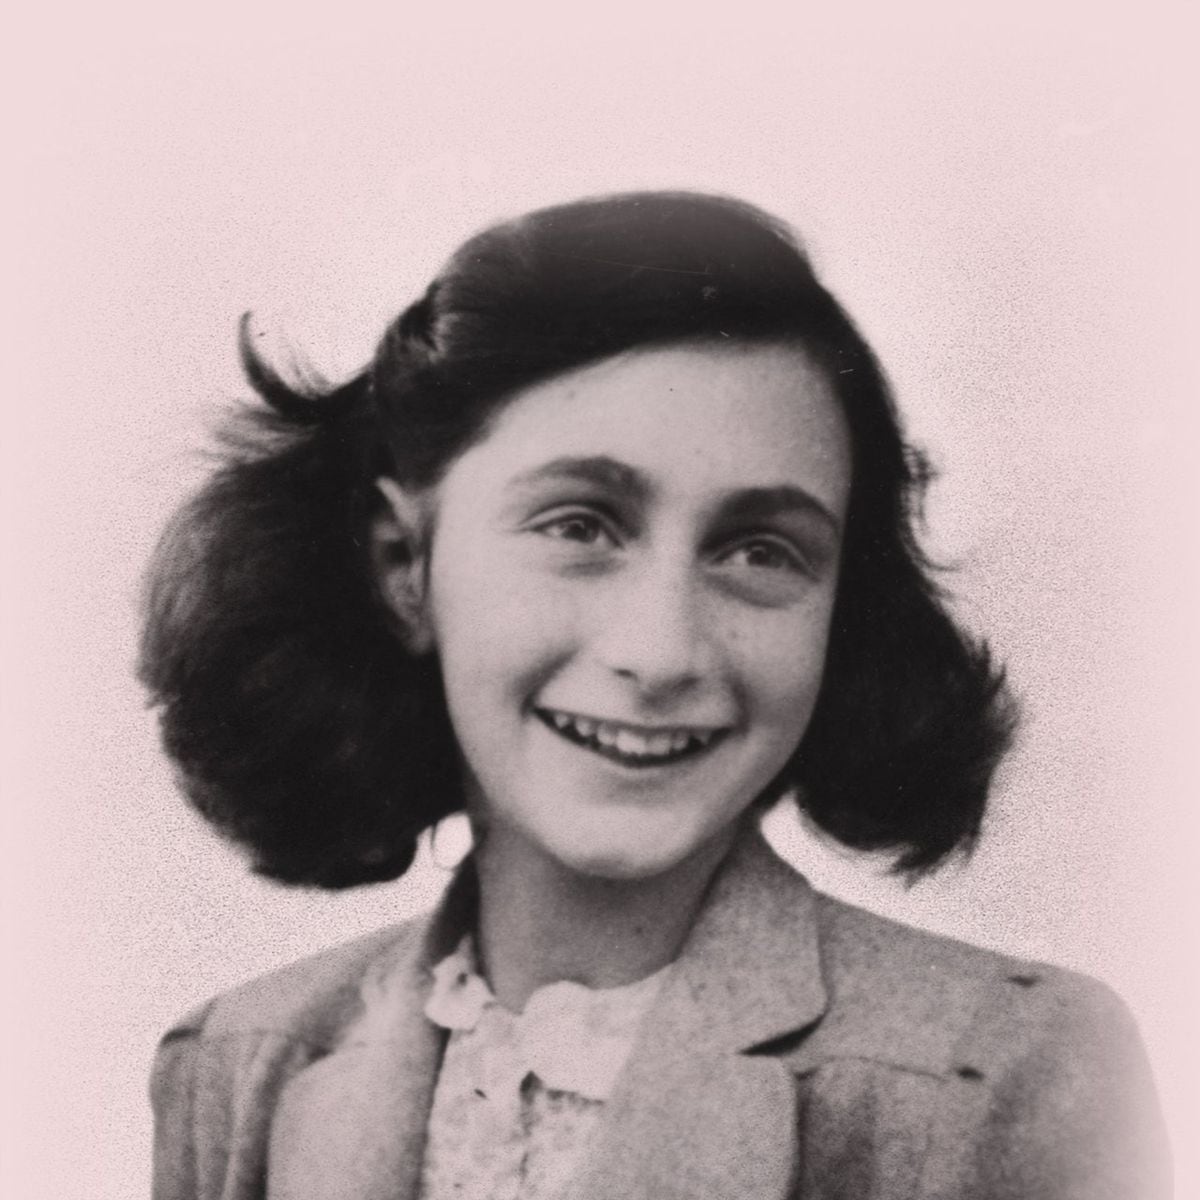 Anne Frank died weeks before the end of the war